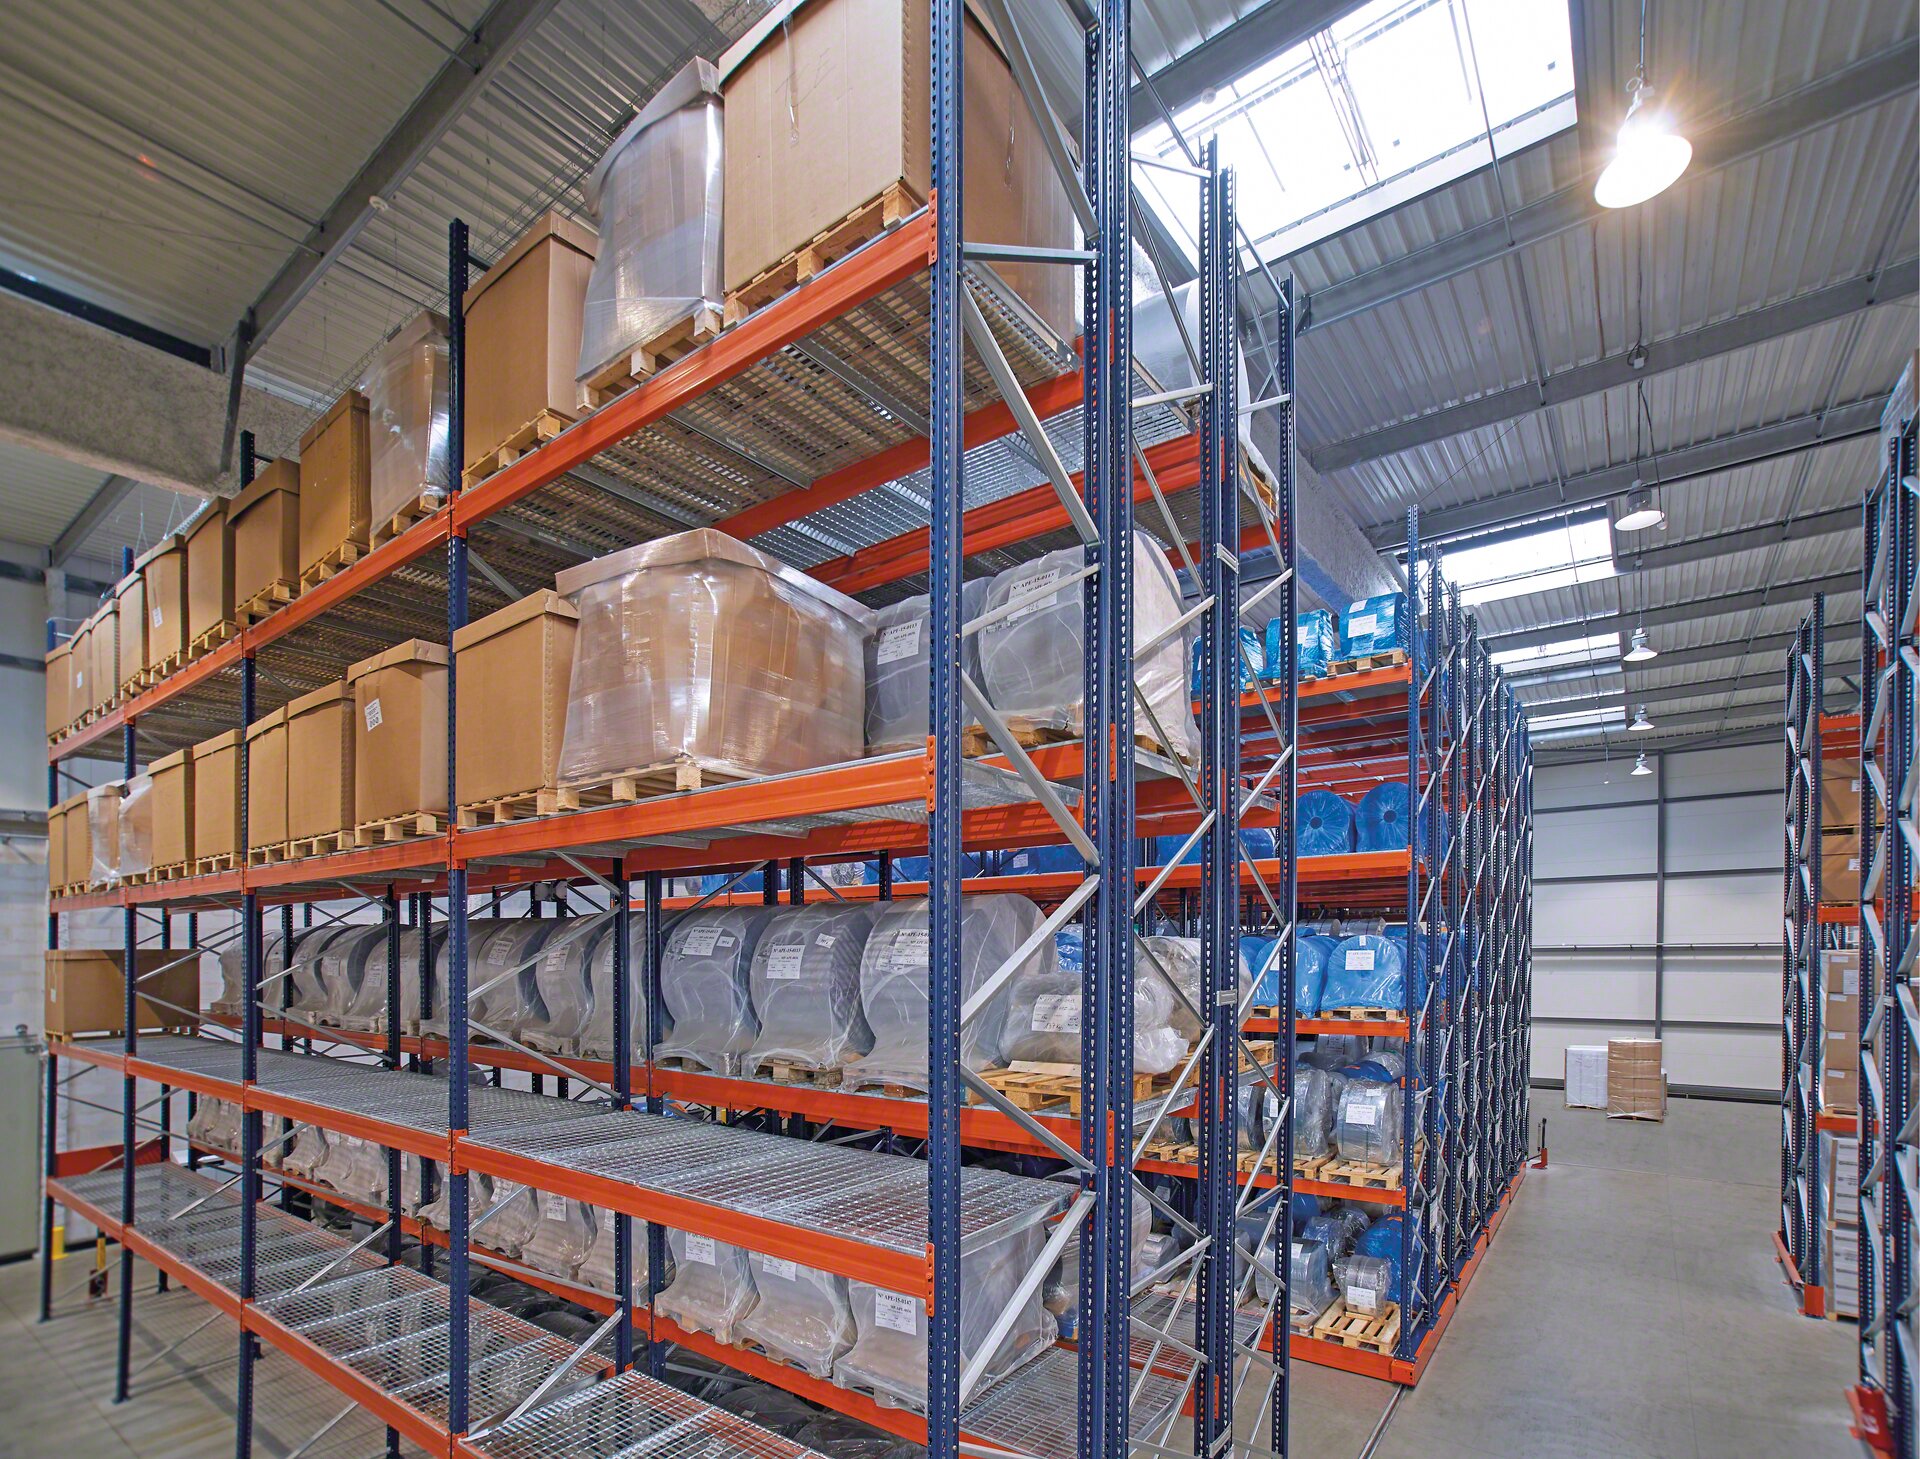 Mesh shelves are placed directly on the pallet rack beams